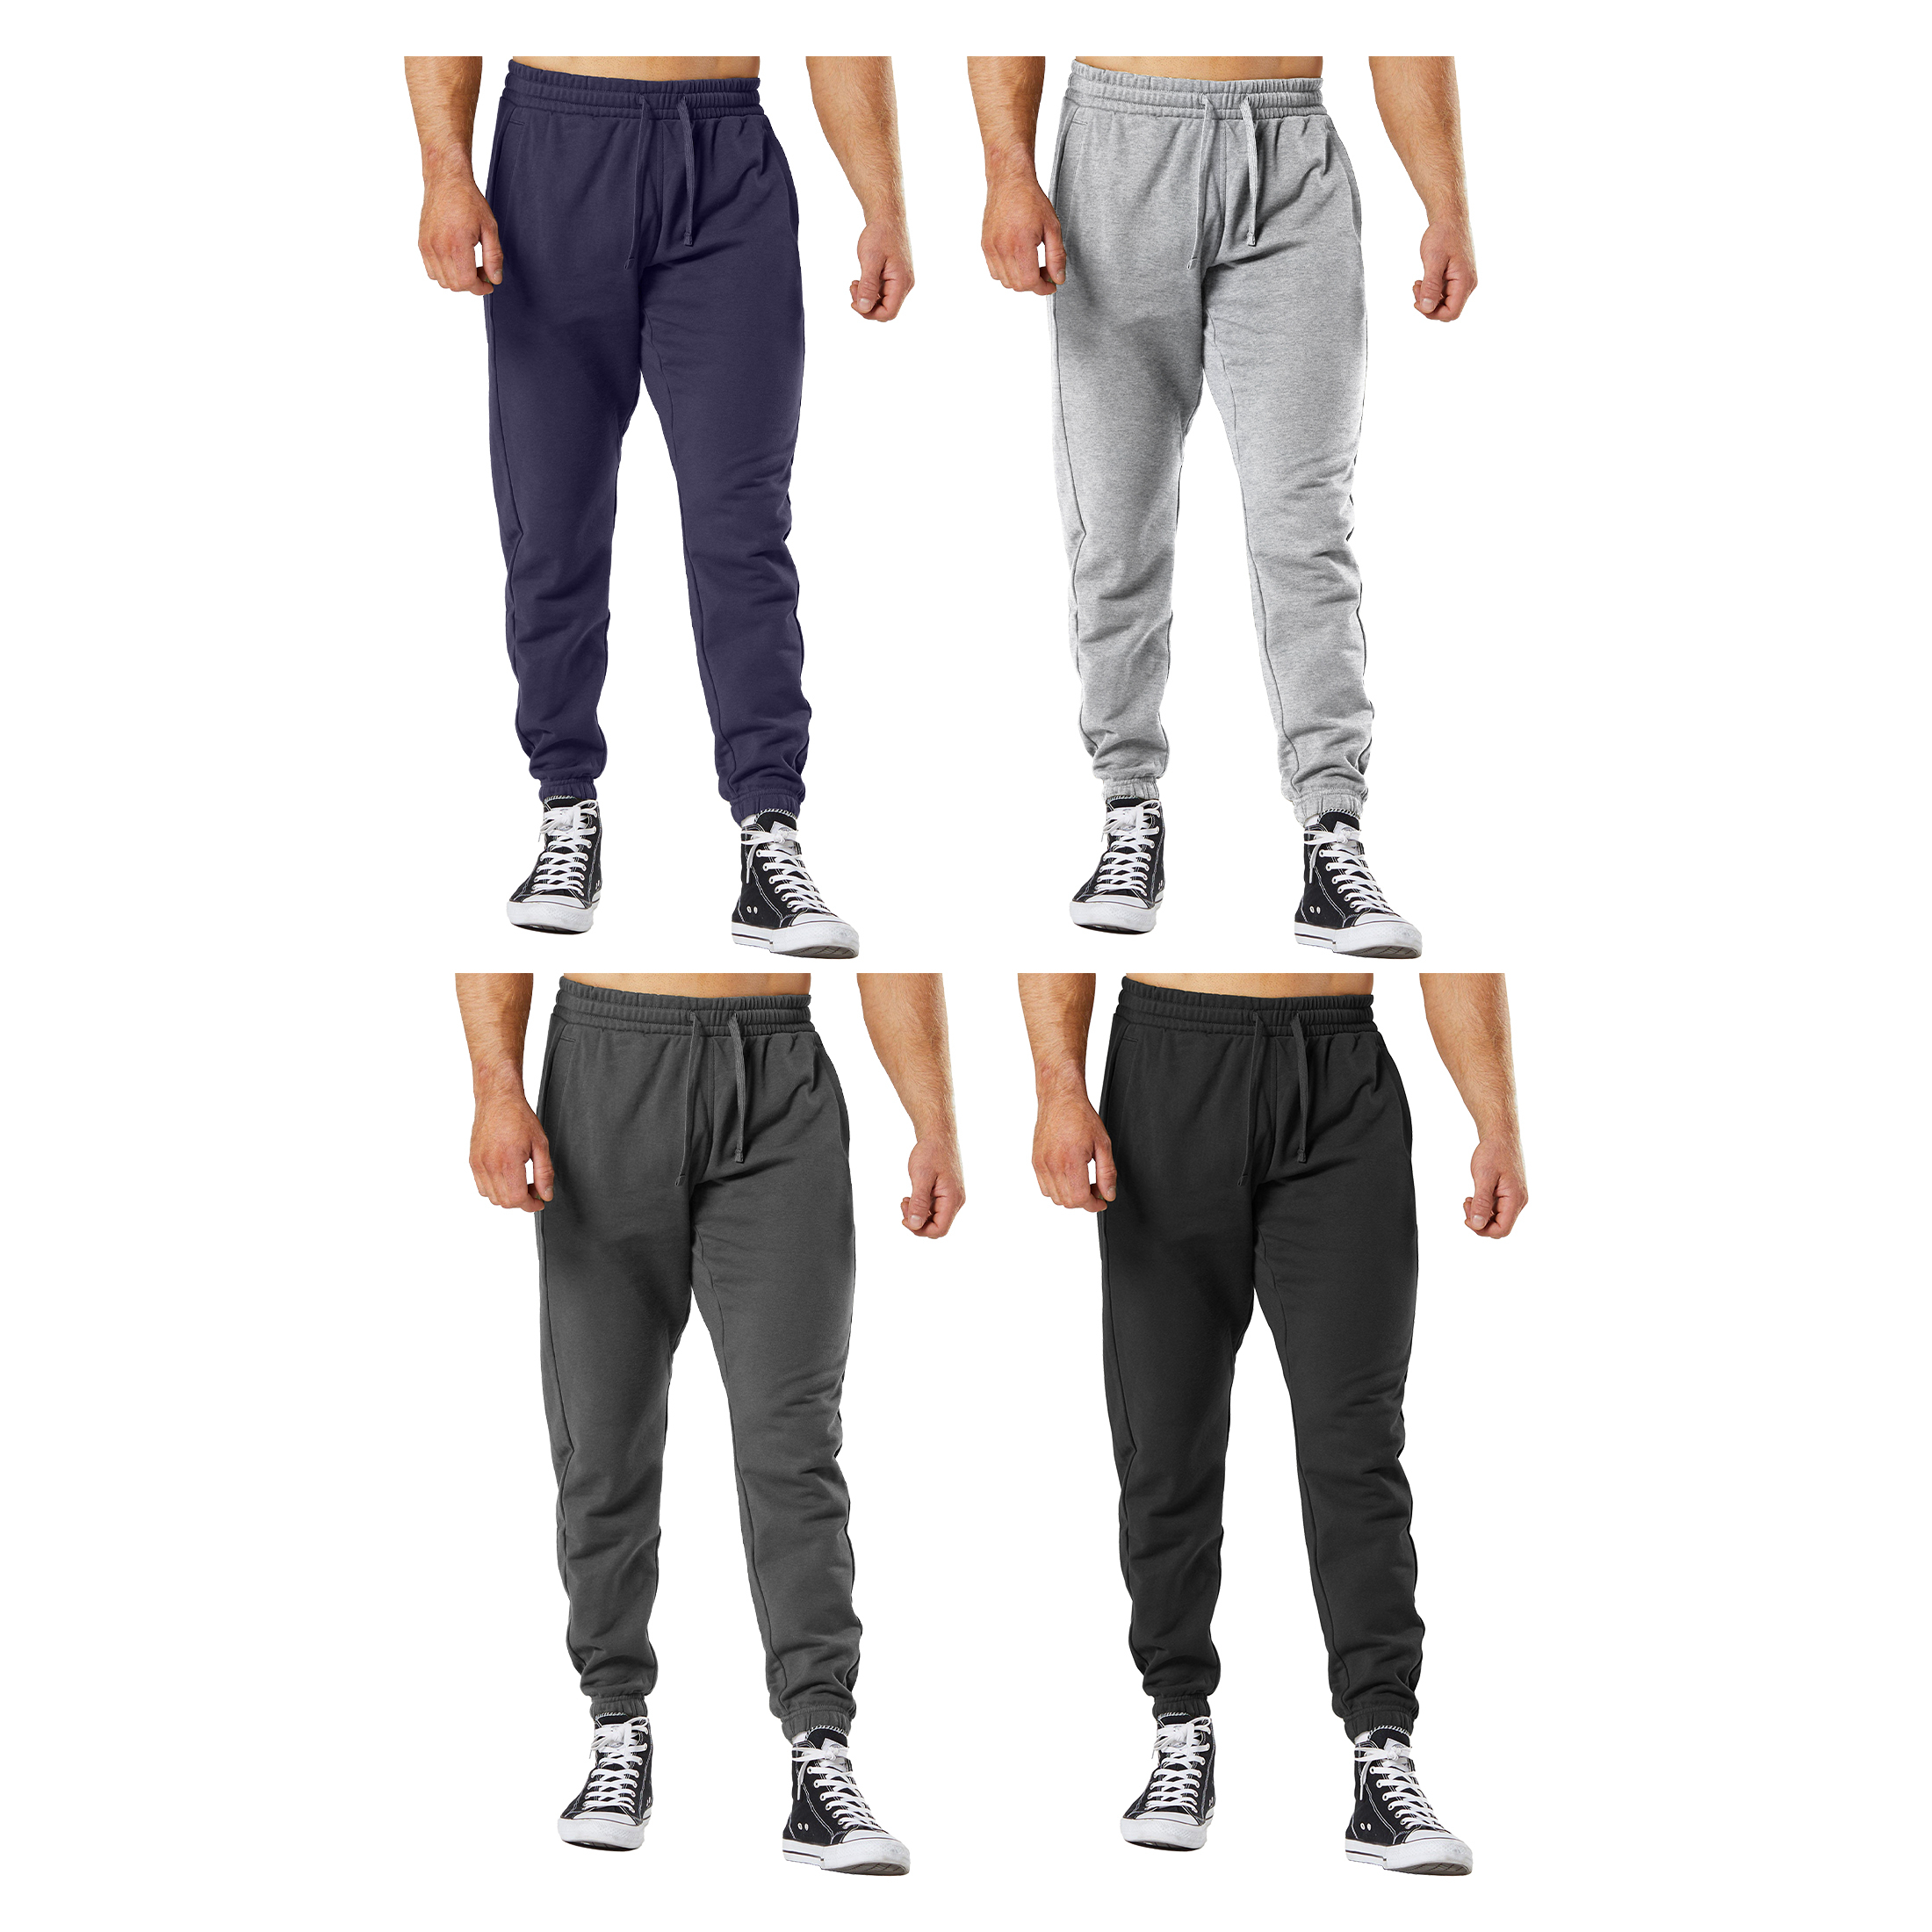 4-Pack: Men's Casual Fleece-Lined Elastic Bottom Jogger Pants With Pockets - Small